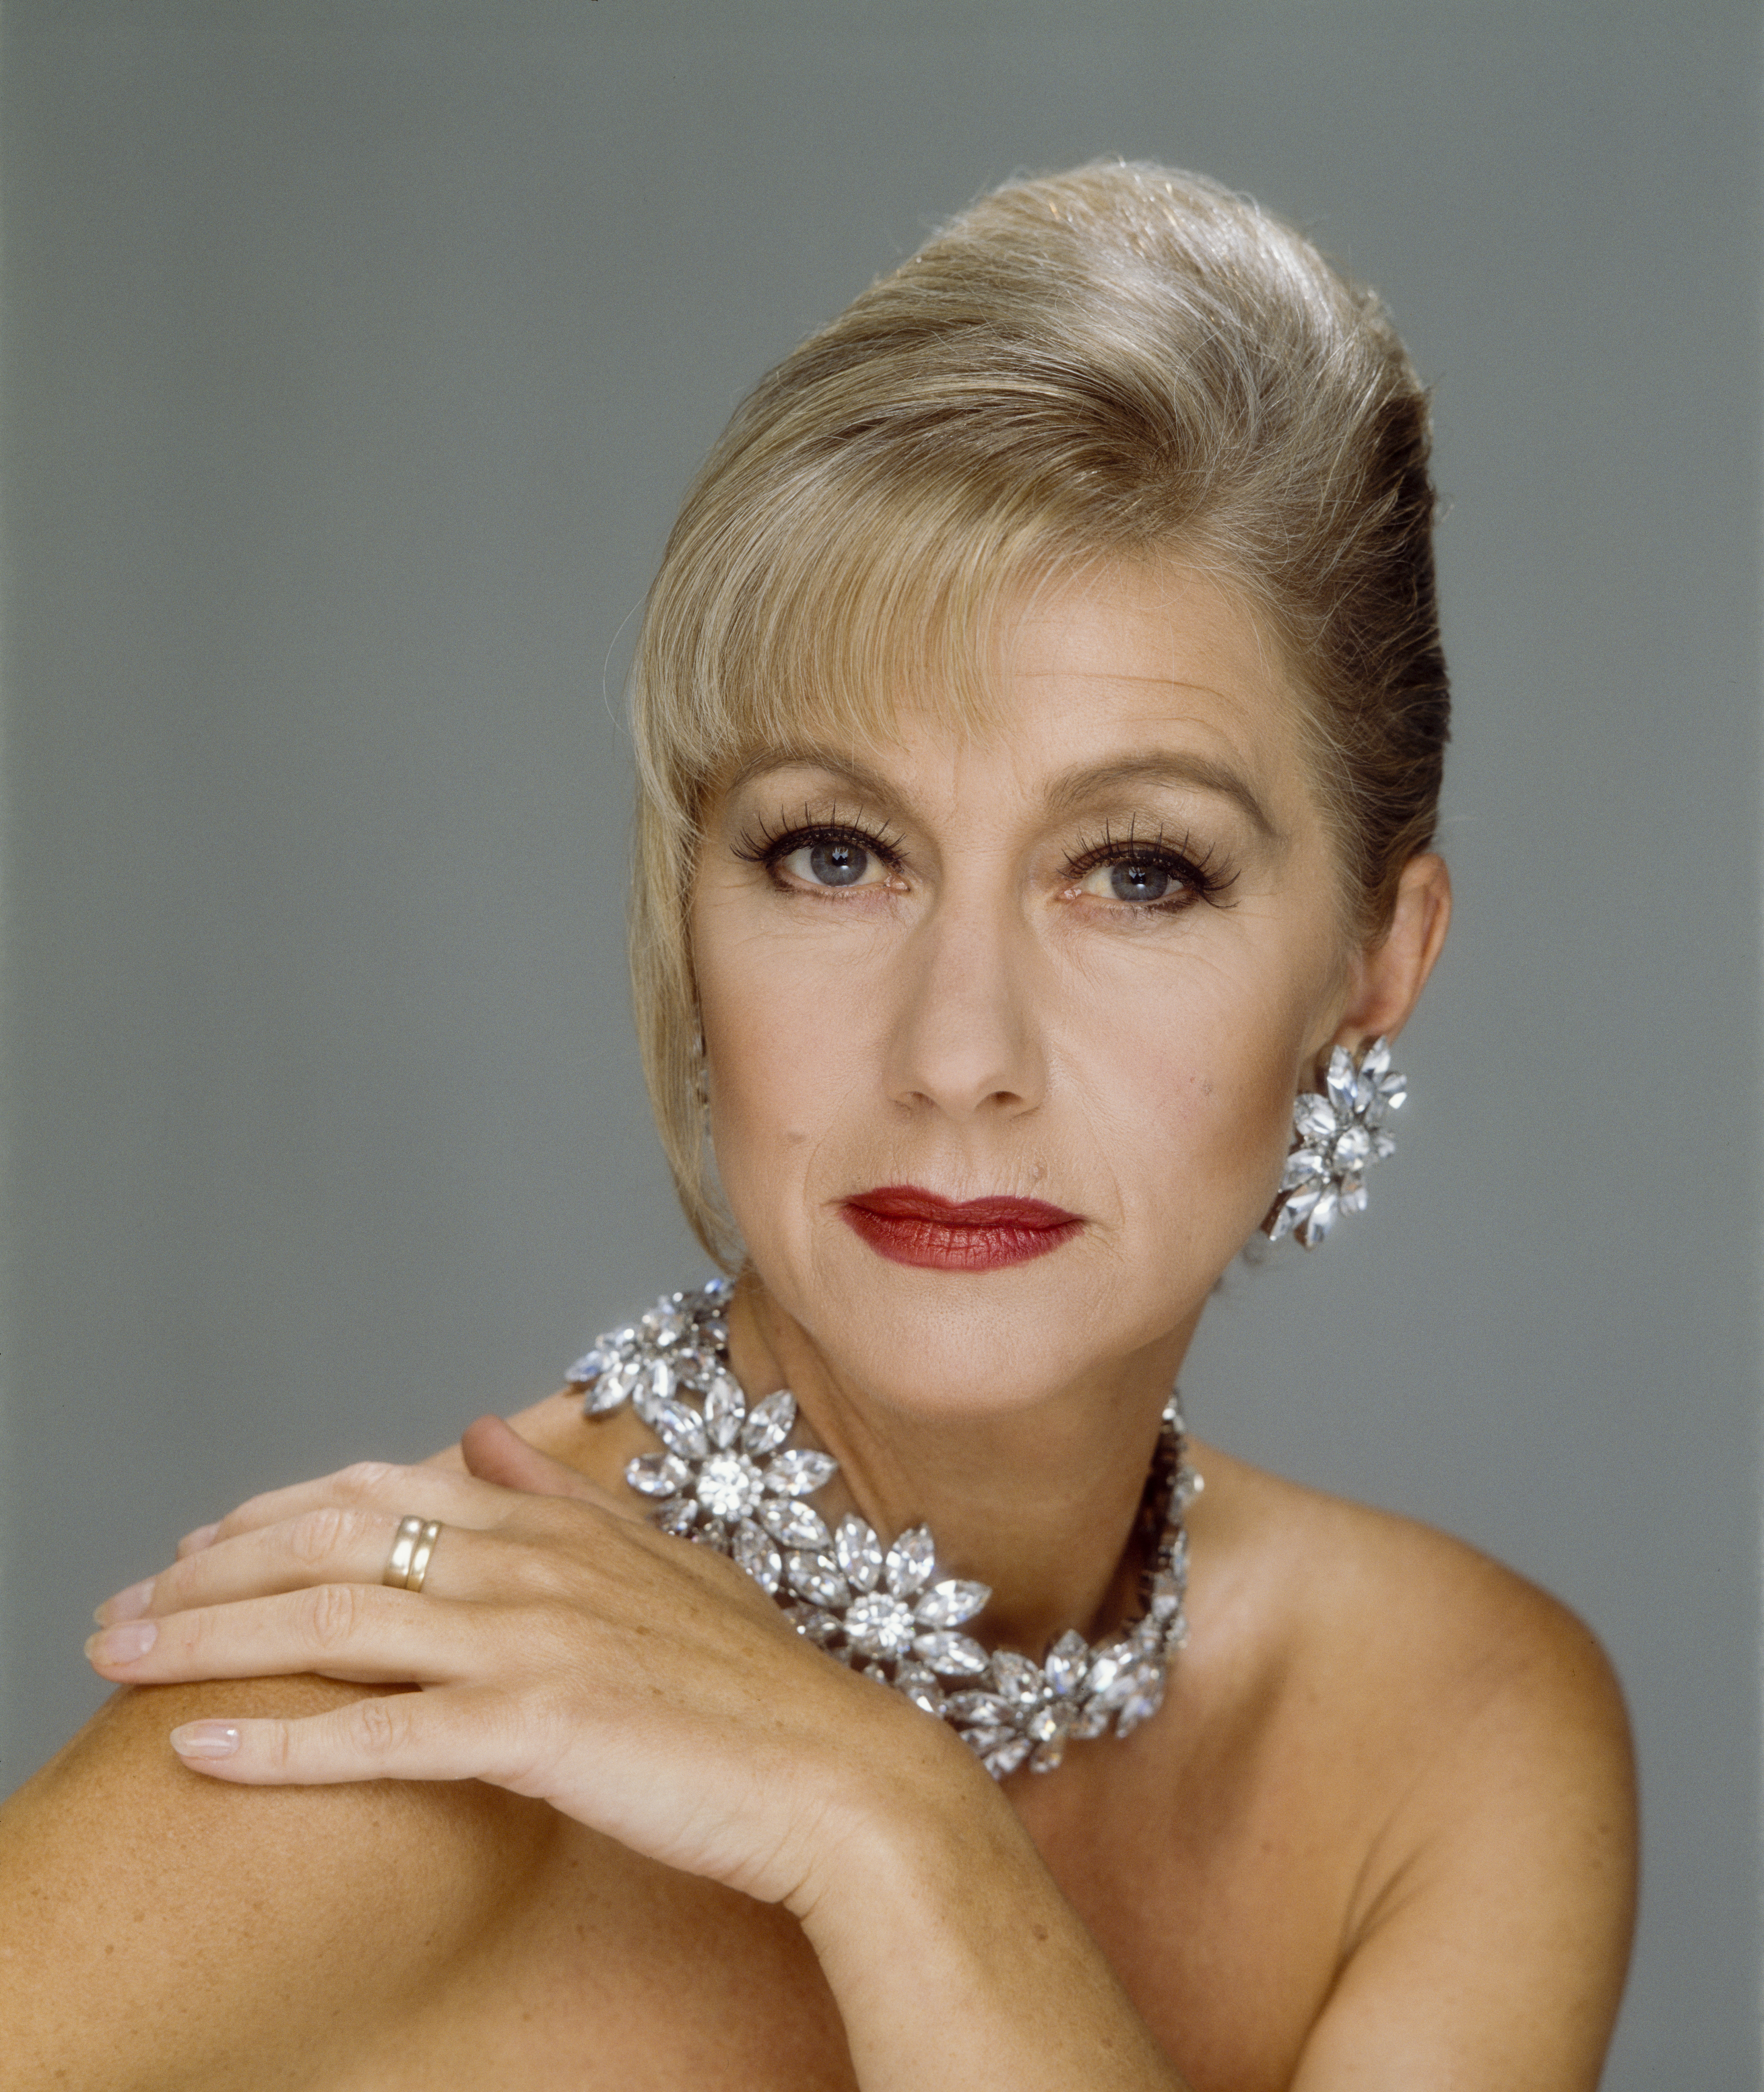 Portrait of an elegant woman with statement earrings and necklace, posing with hand on shoulder